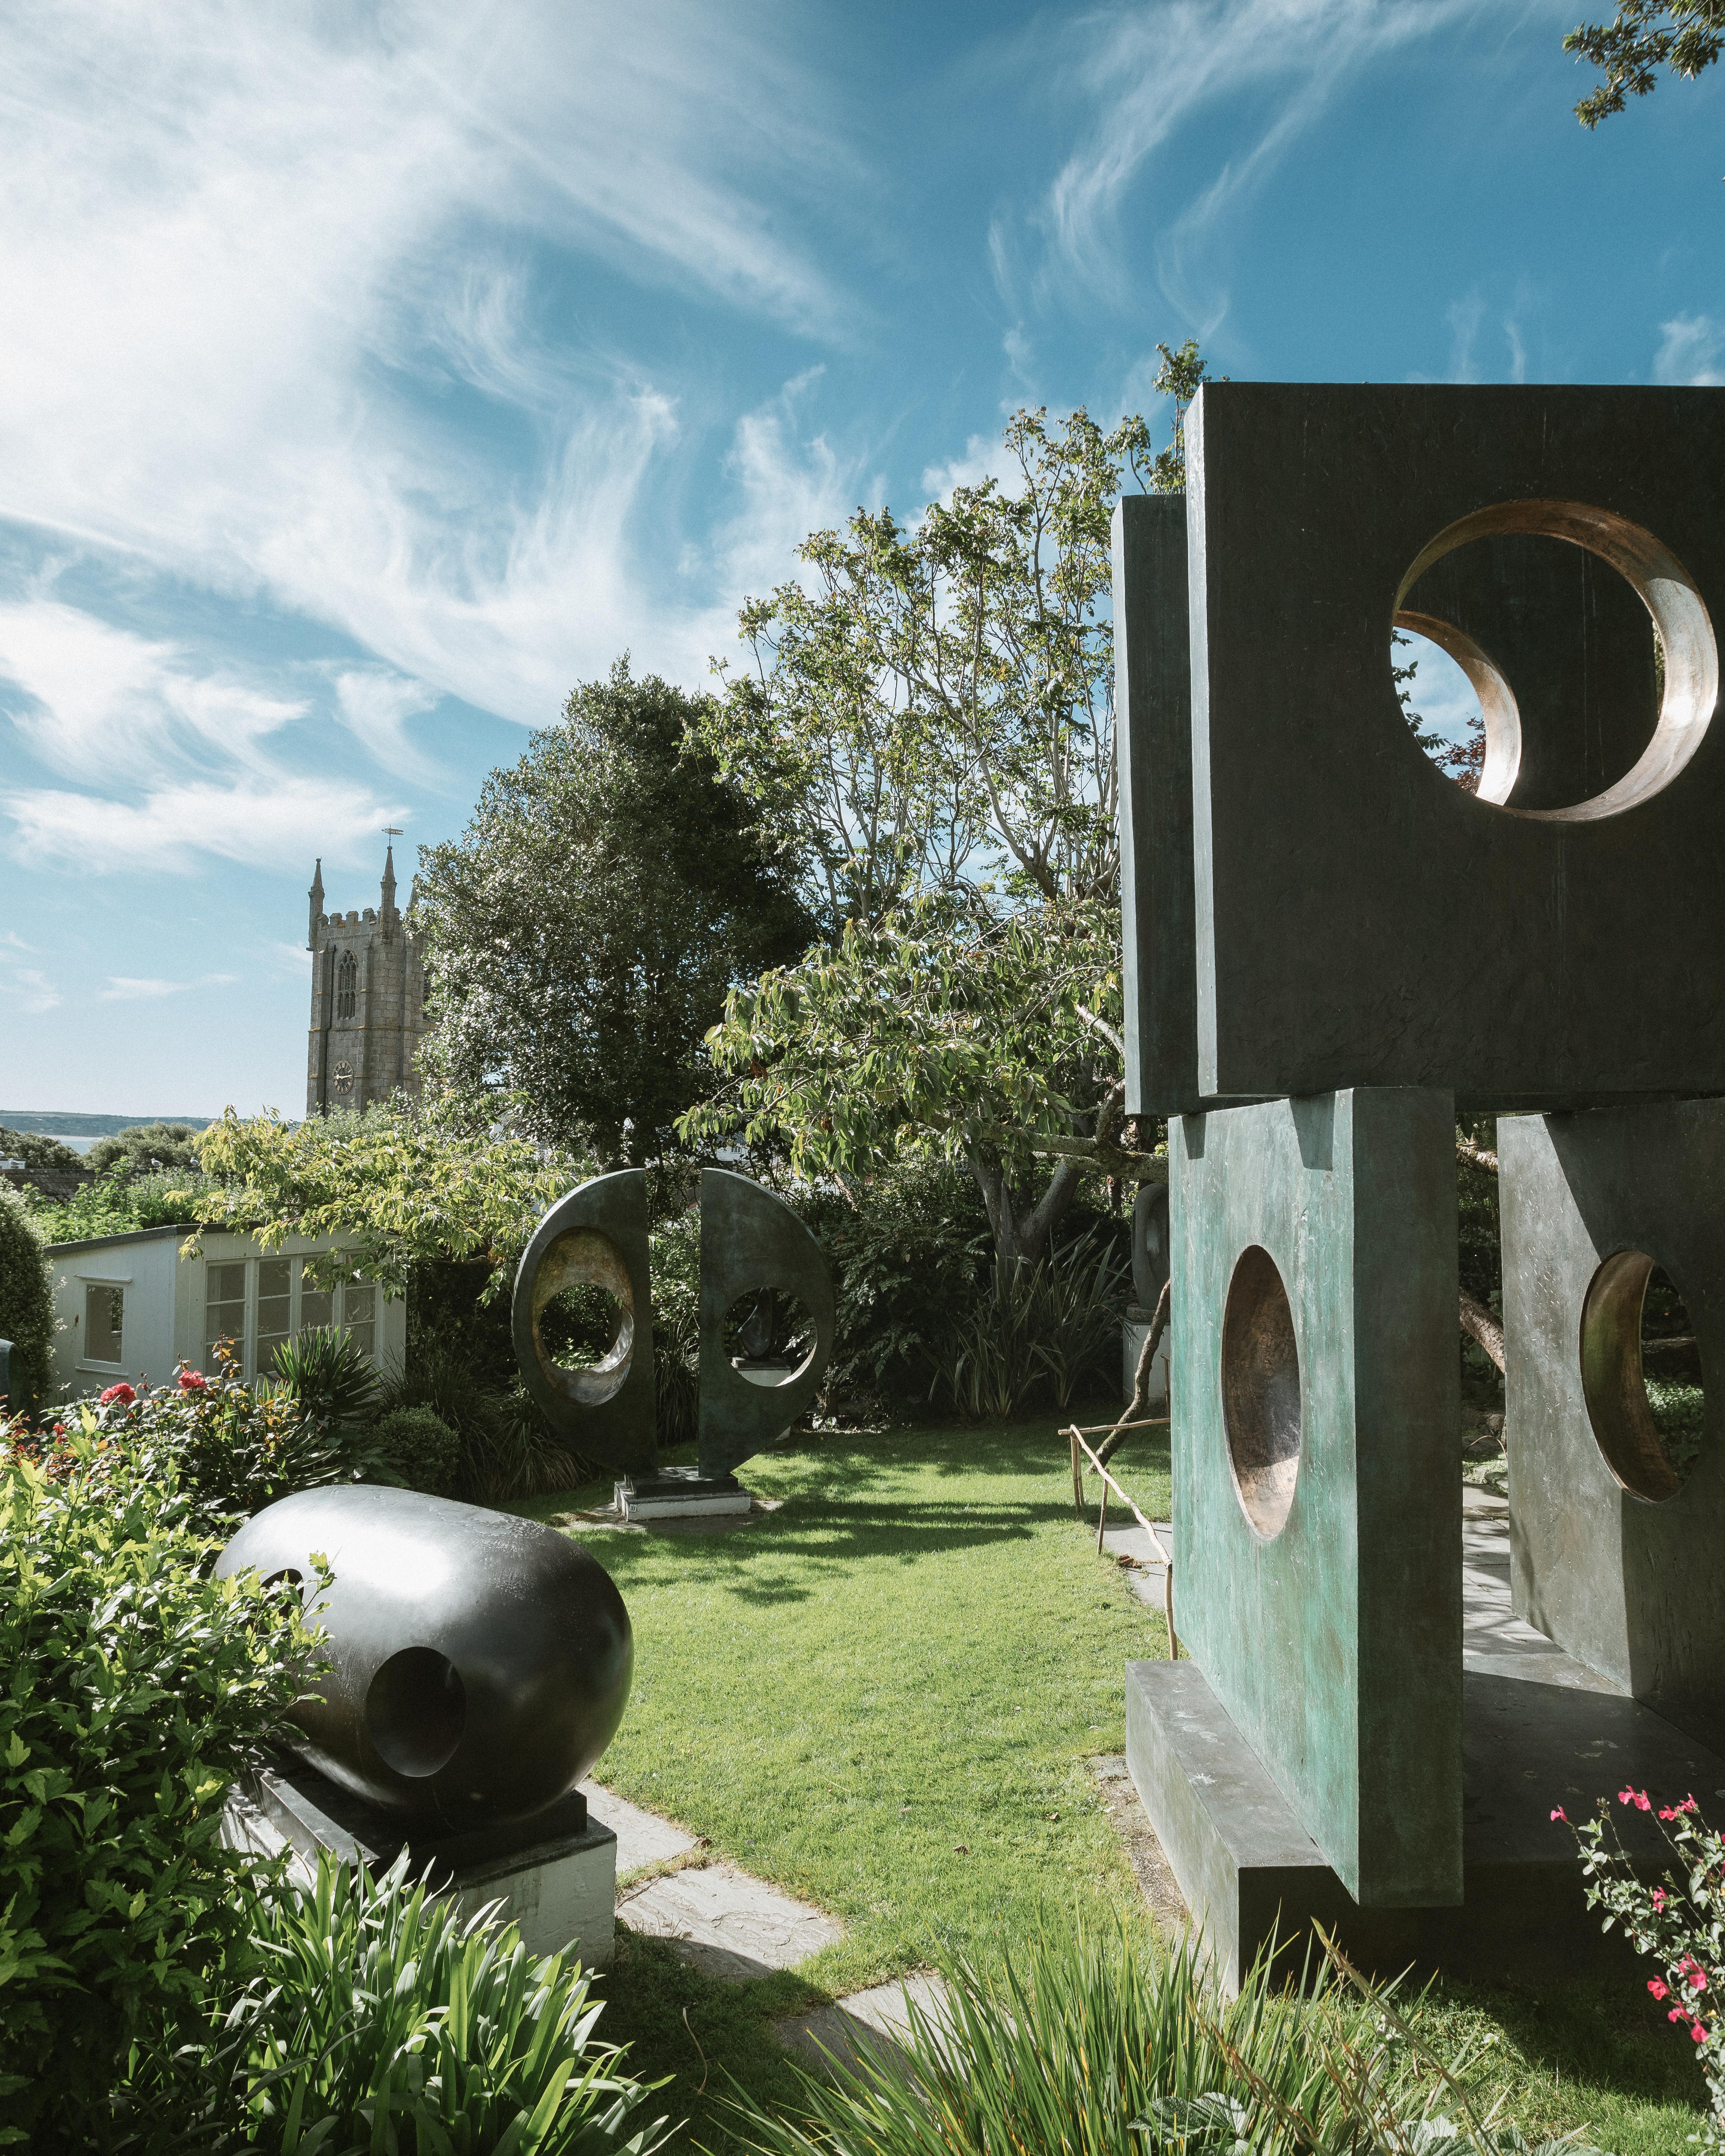 Trelwyn Studio, where the artist Barbara Hepworth lived, is open to visitors